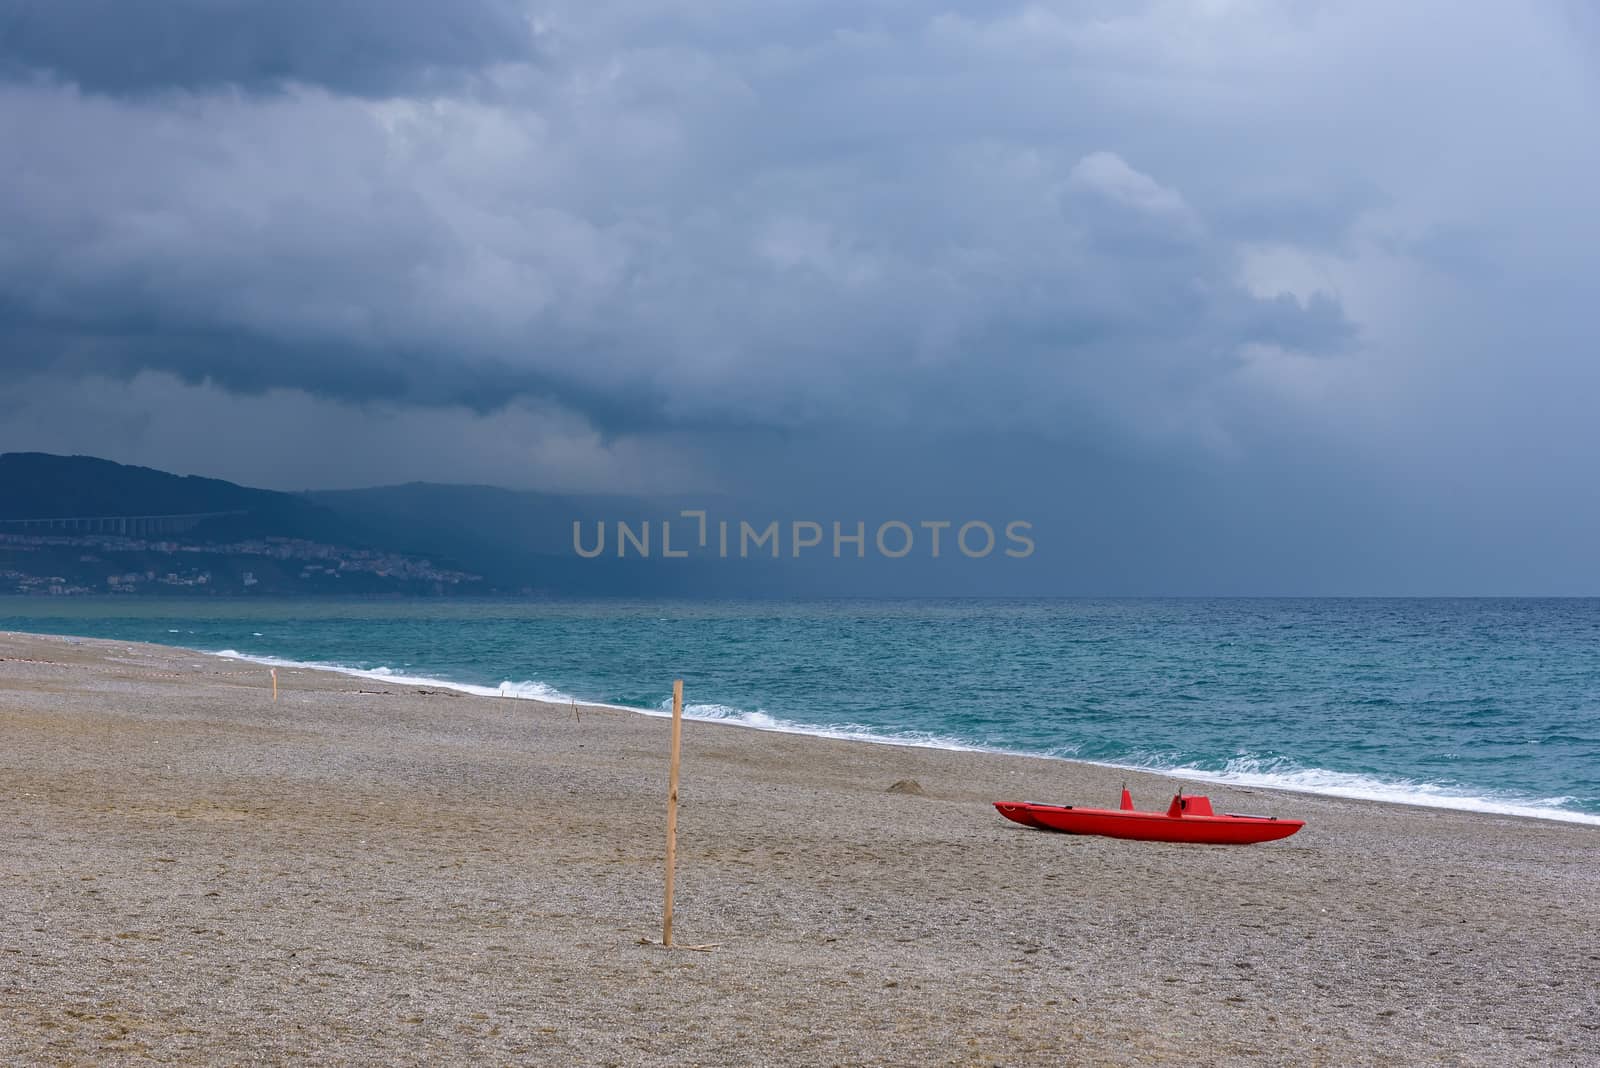 Dark clouds over the calabrian beach by mkos83